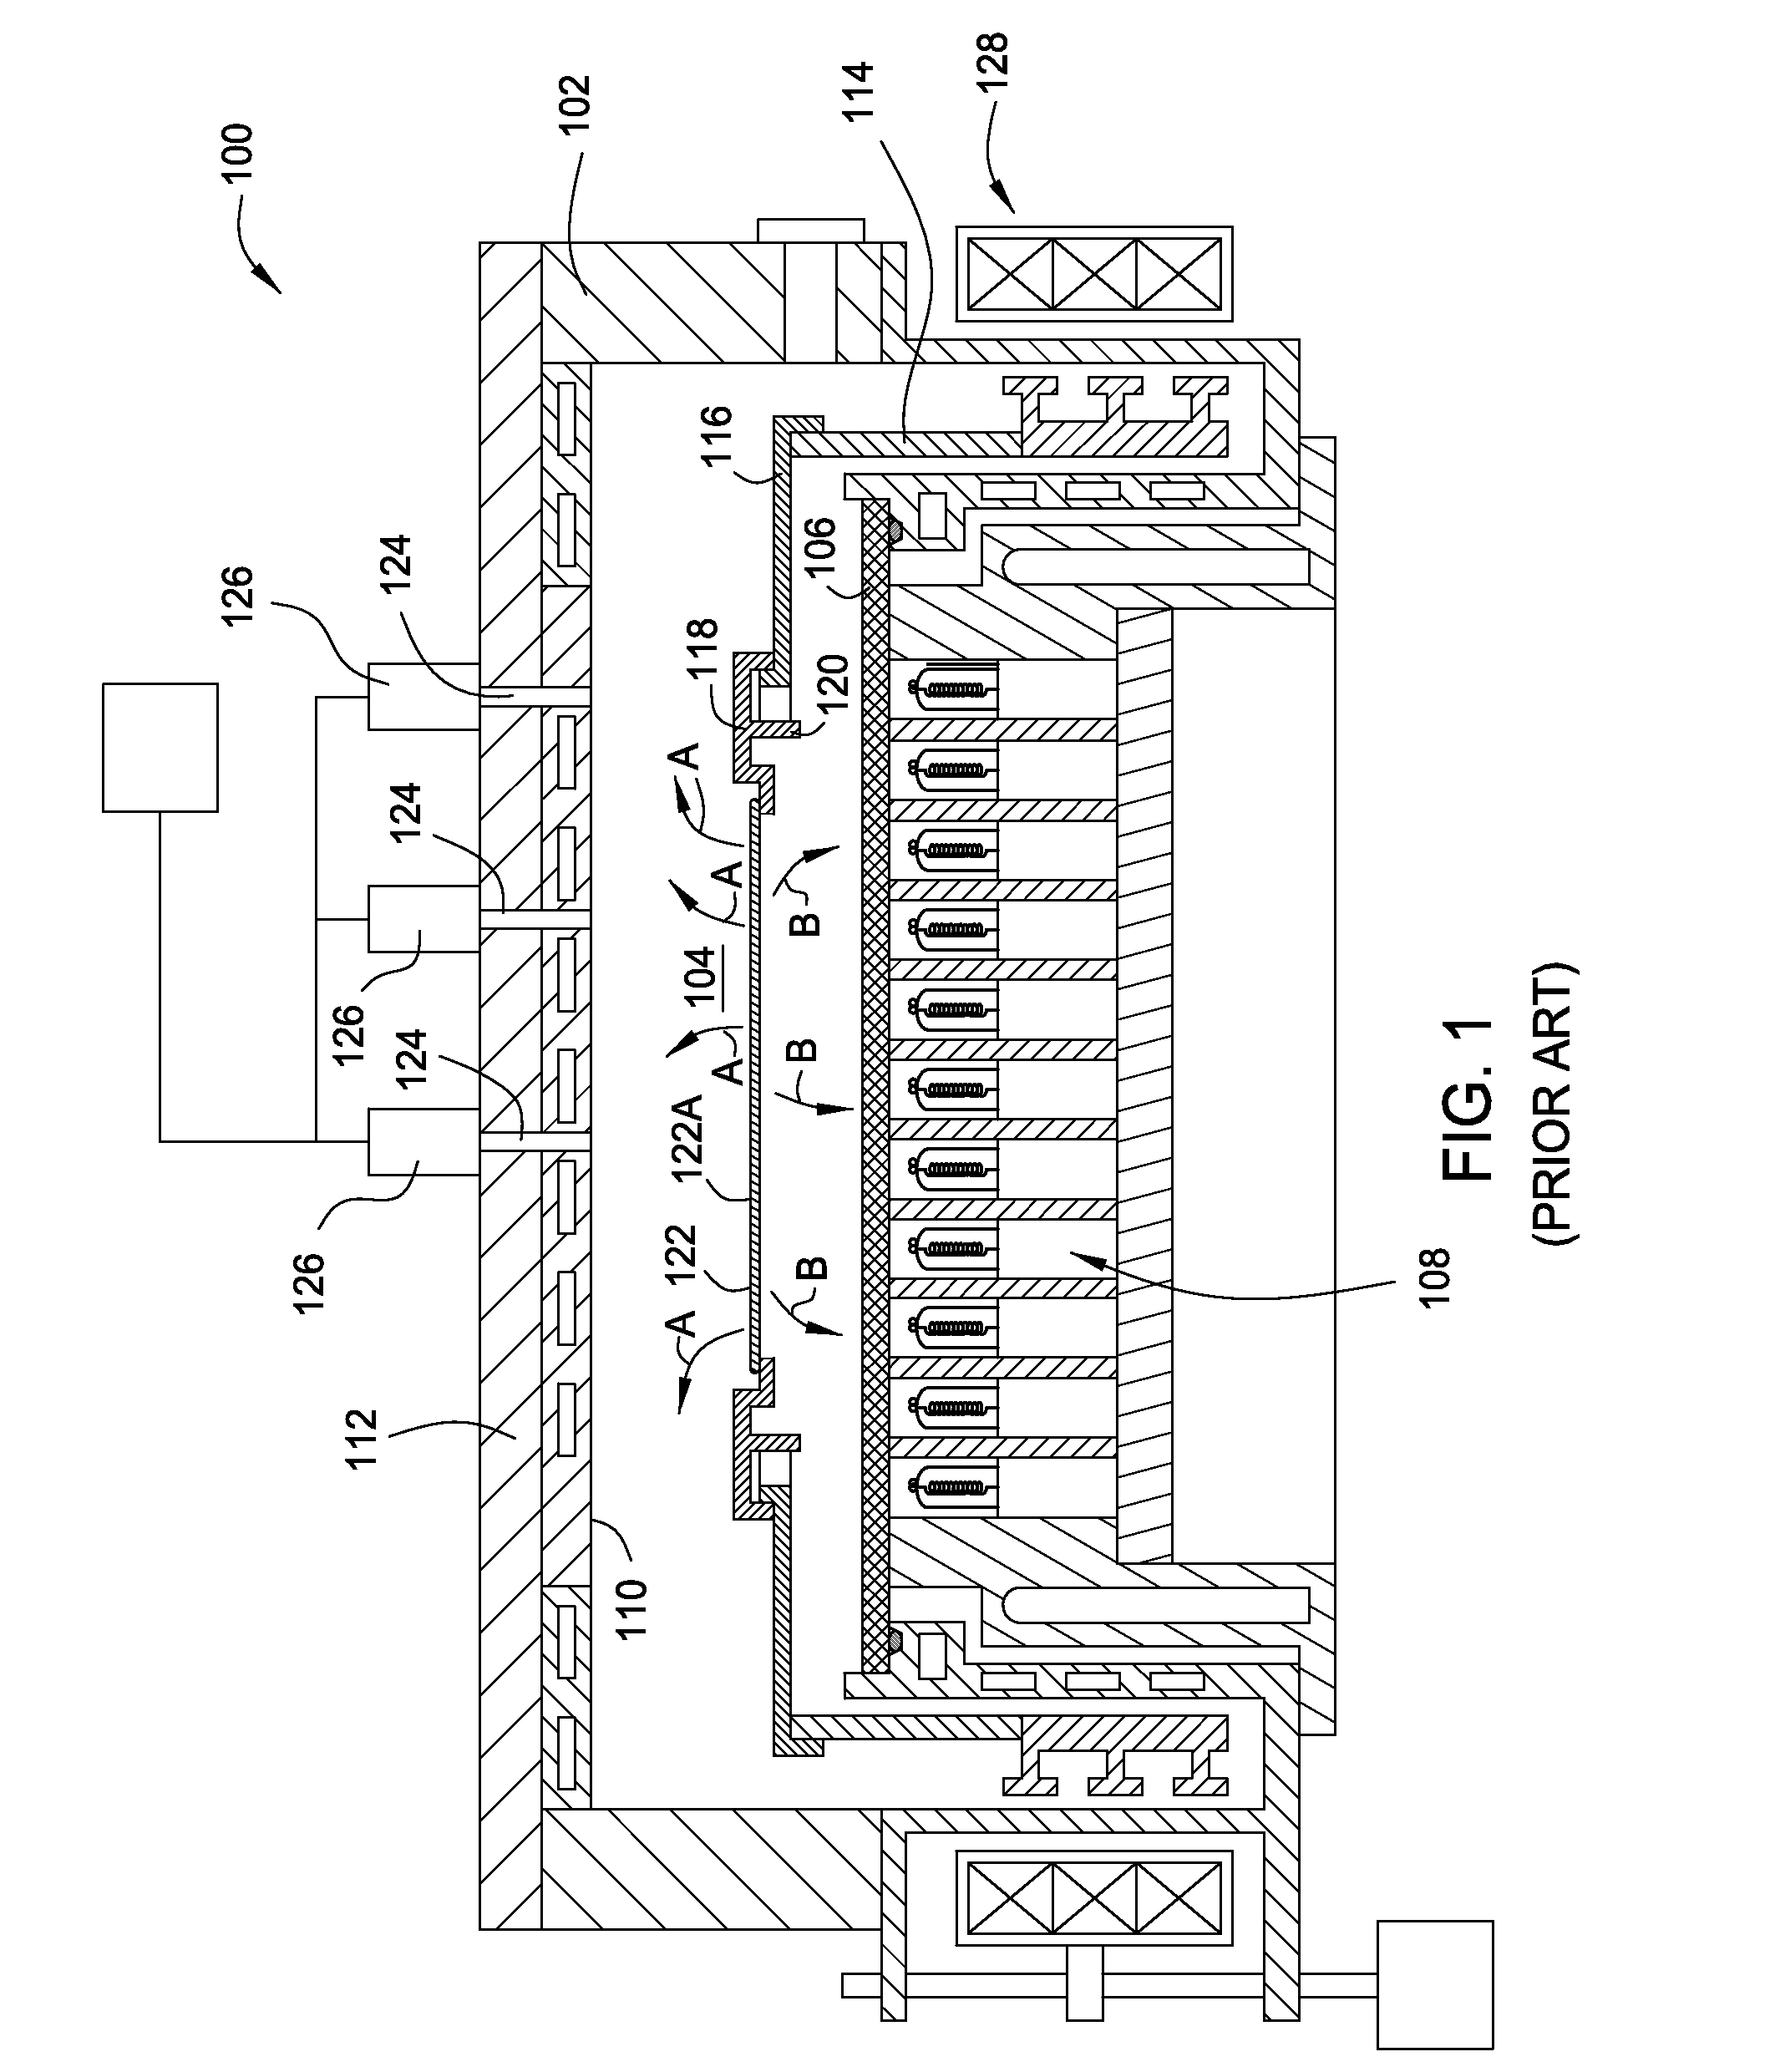 Apparatus for reducing the effect of contamination on a rapid thermal process